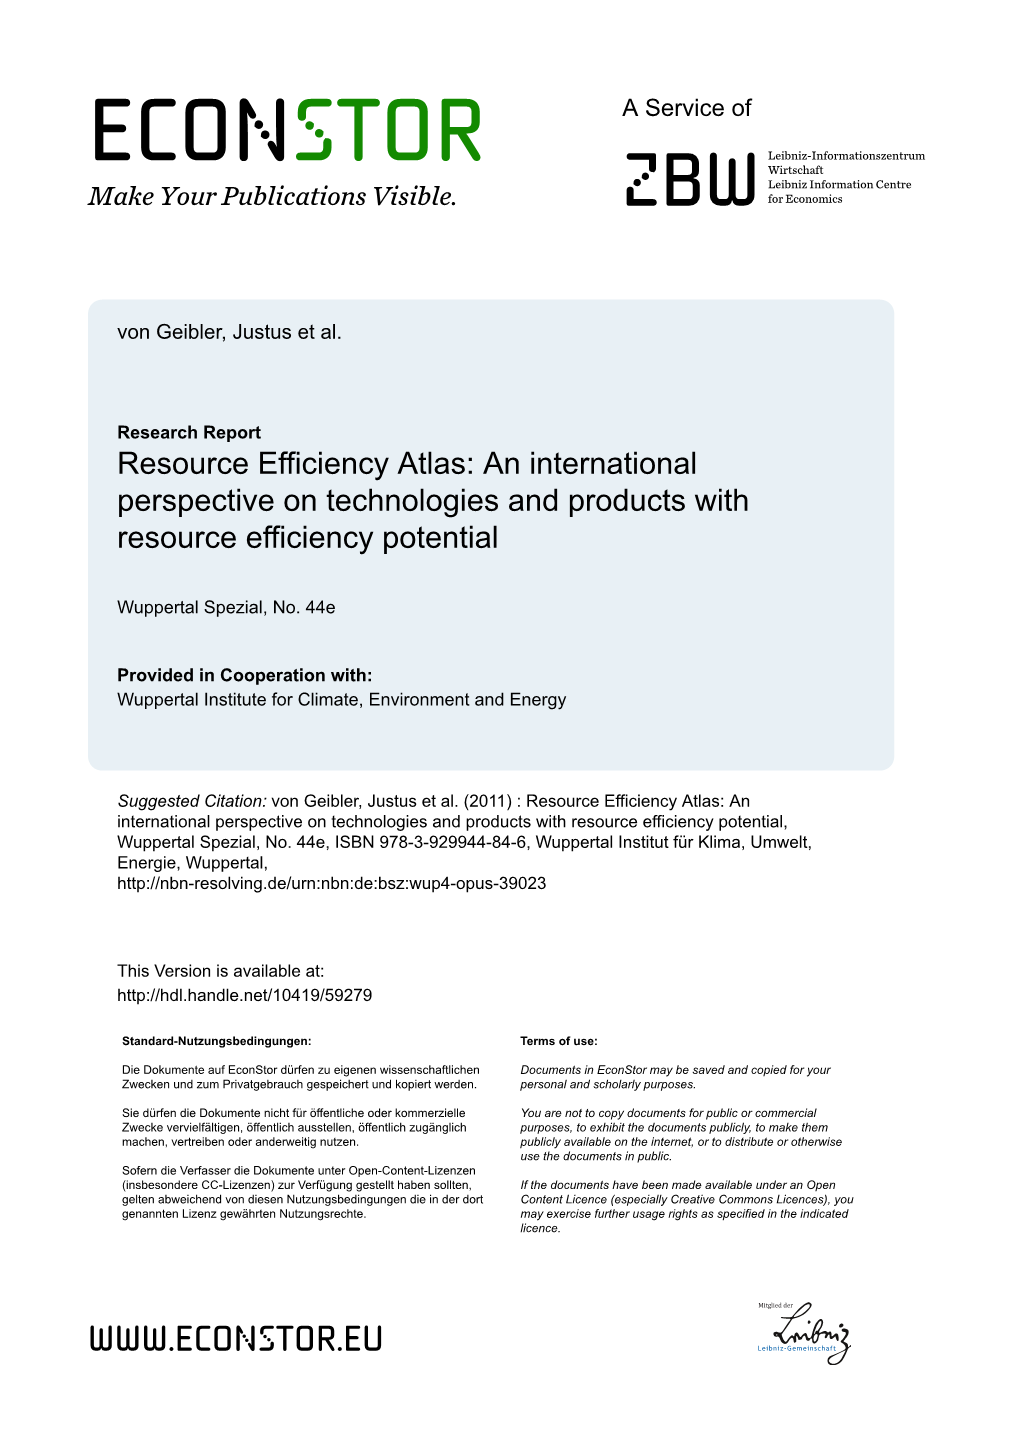 Resource Efficiency Atlas: an International Perspective on Technologies and Products with Resource Efficiency Potential